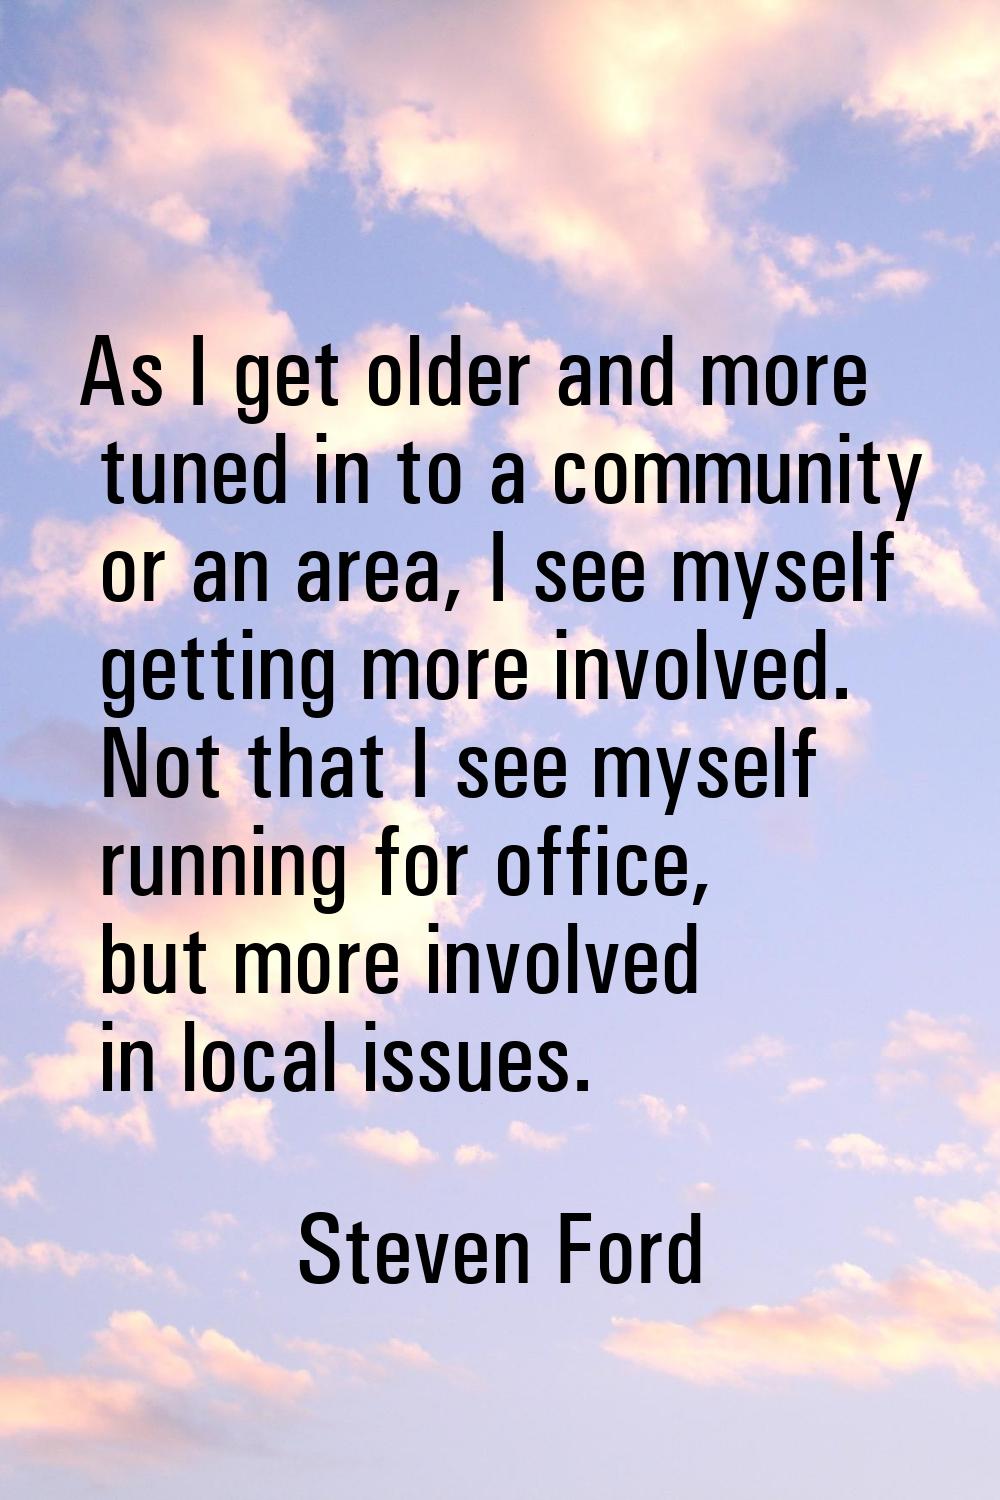 As I get older and more tuned in to a community or an area, I see myself getting more involved. Not